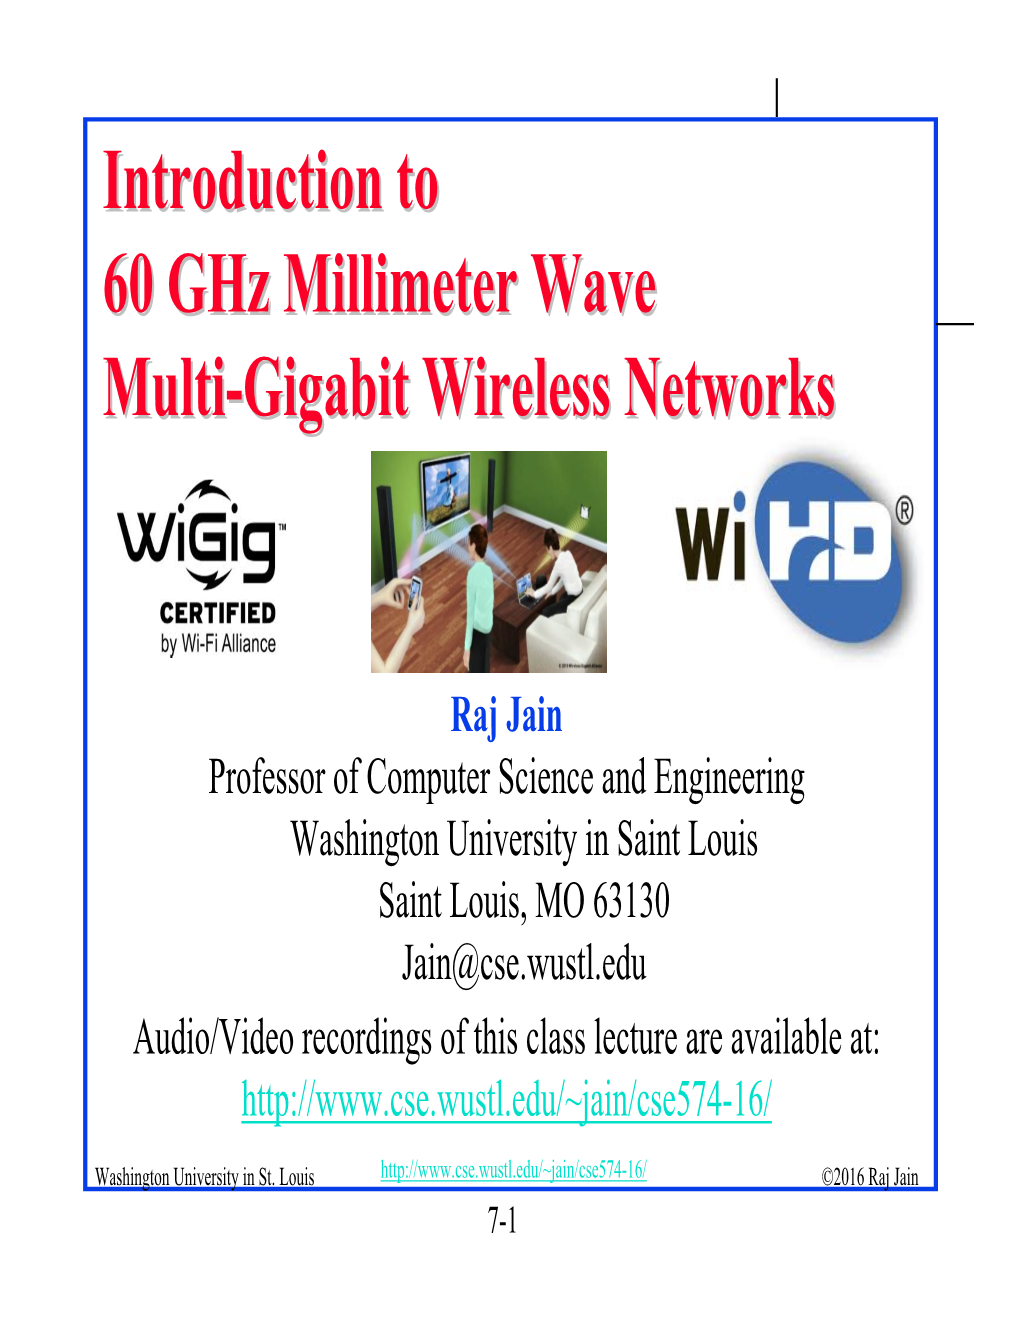 Introduction to 60 Ghz Millimeter Wave Multi-Gigabit Wireless Networks